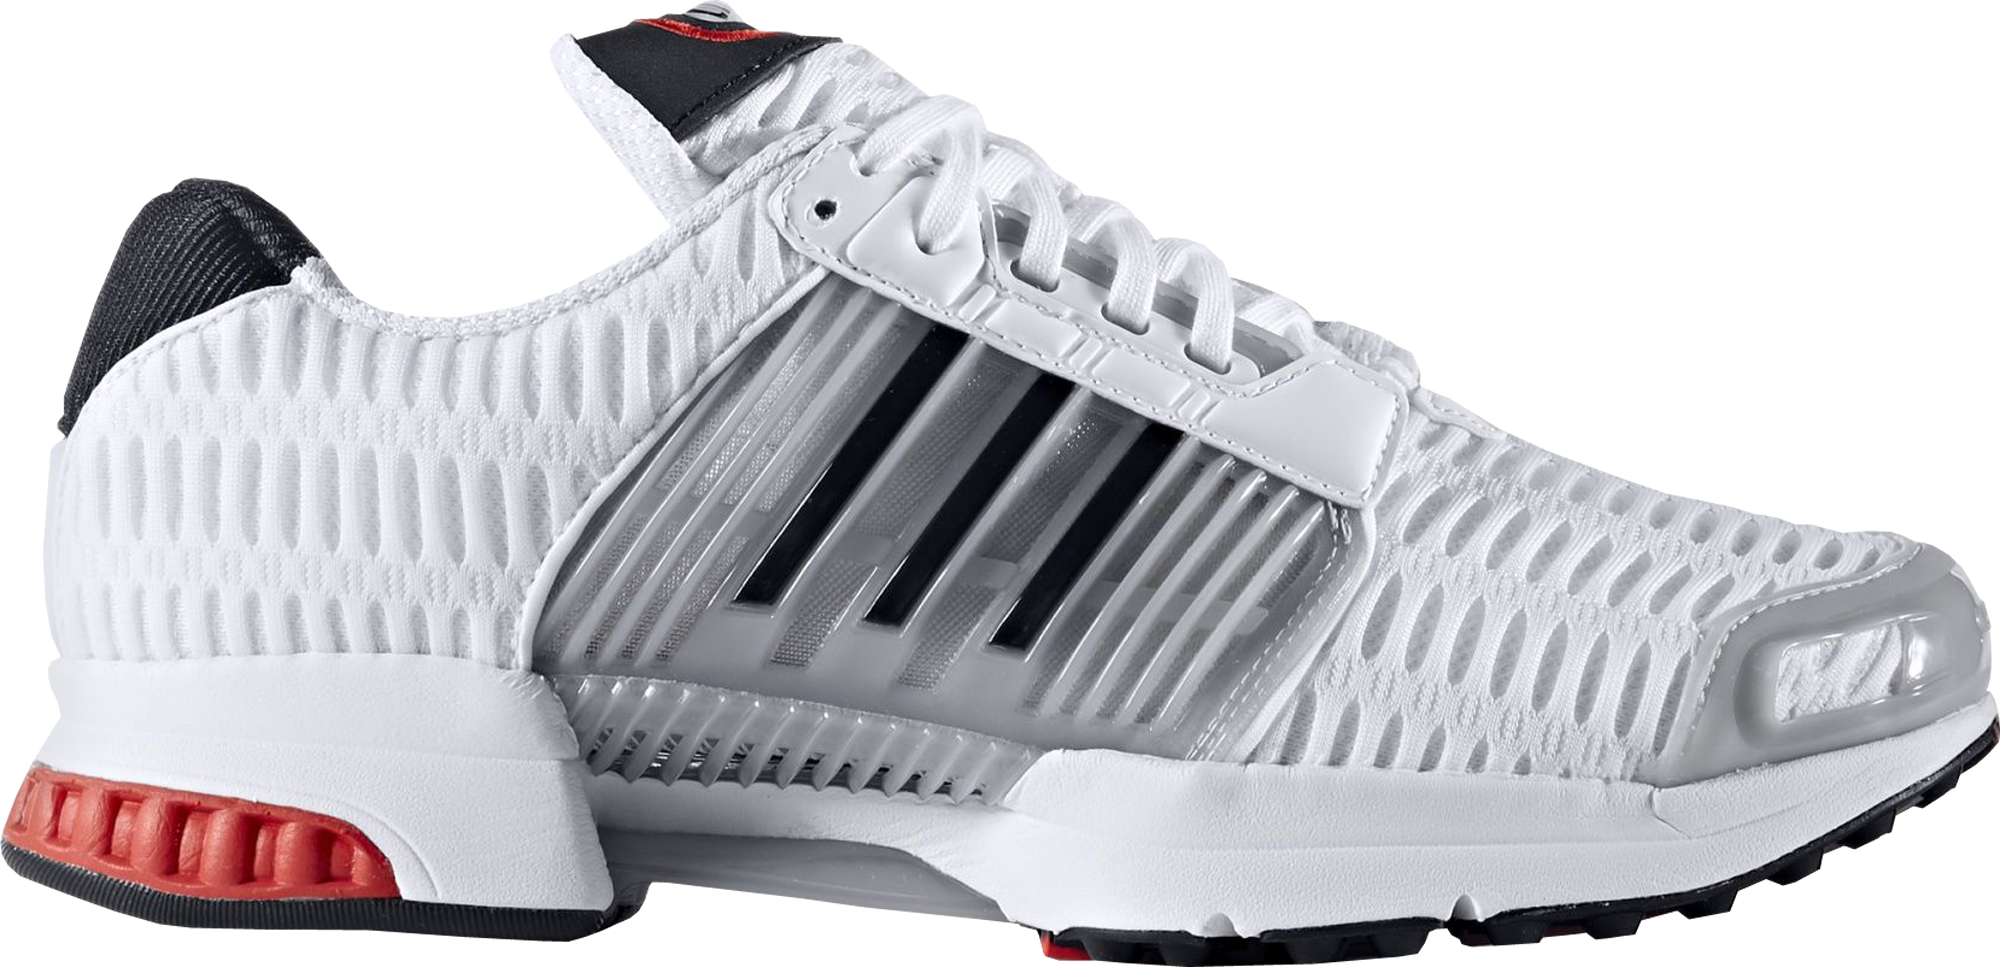 ADIDAS CLIMACOOL VENTO Running Shoes For Men - Buy ADIDAS CLIMACOOL VENTO Running  Shoes For Men Online at Best Price - Shop Online for Footwears in India |  Flipkart.com